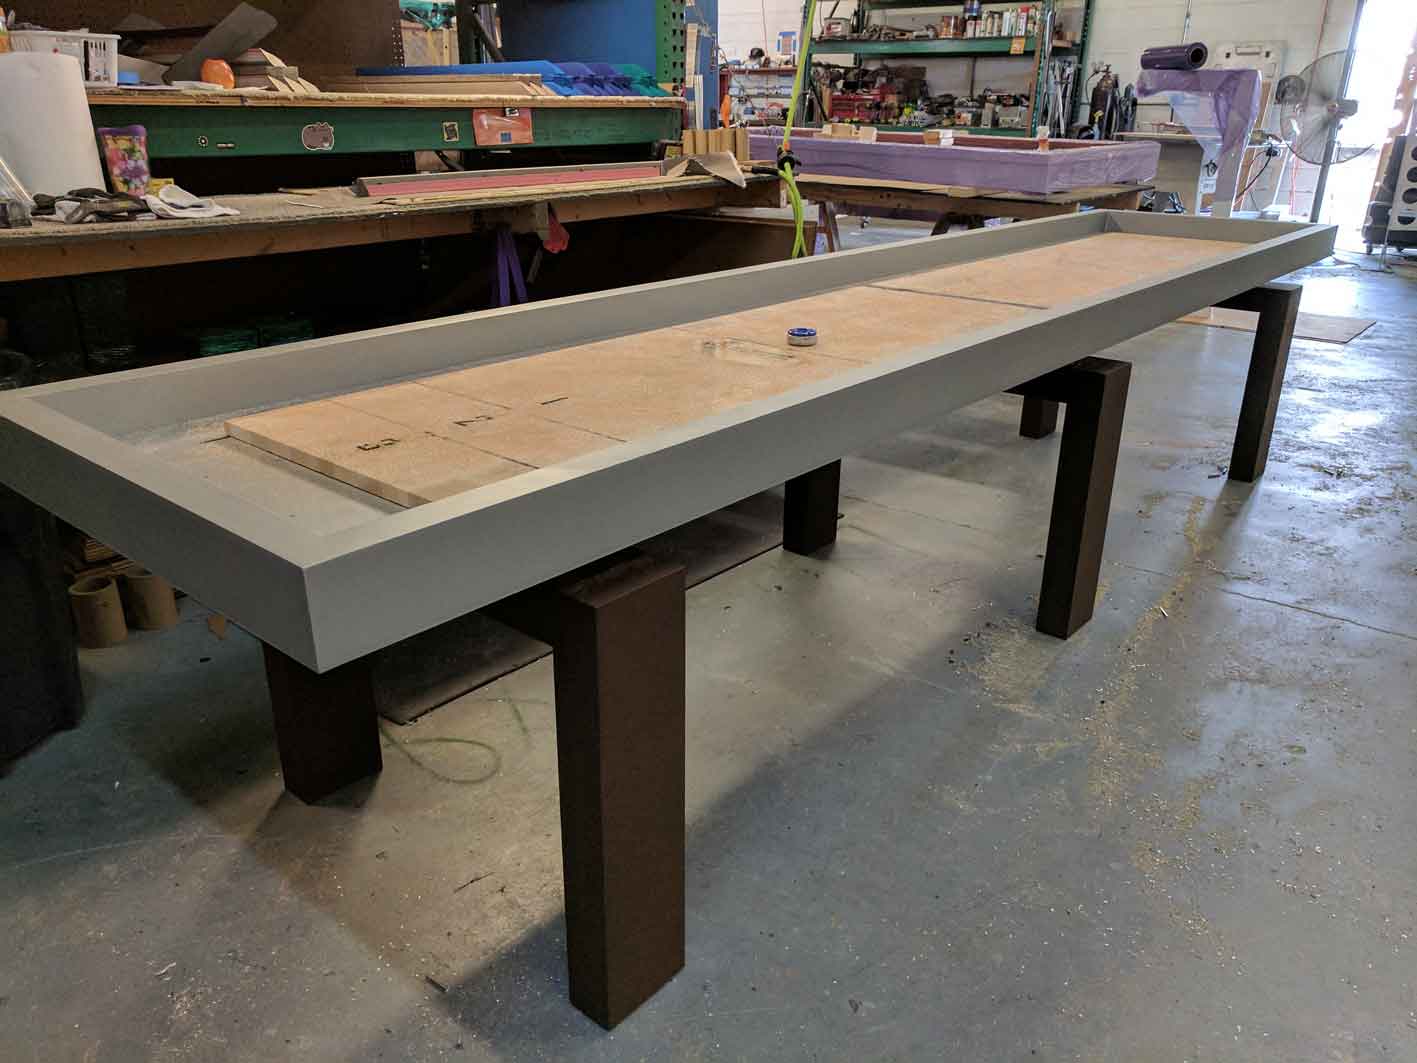 Custom outdoor shuffleboard table in production at R&R Outdoors All Weather Billiards manufacturing facility